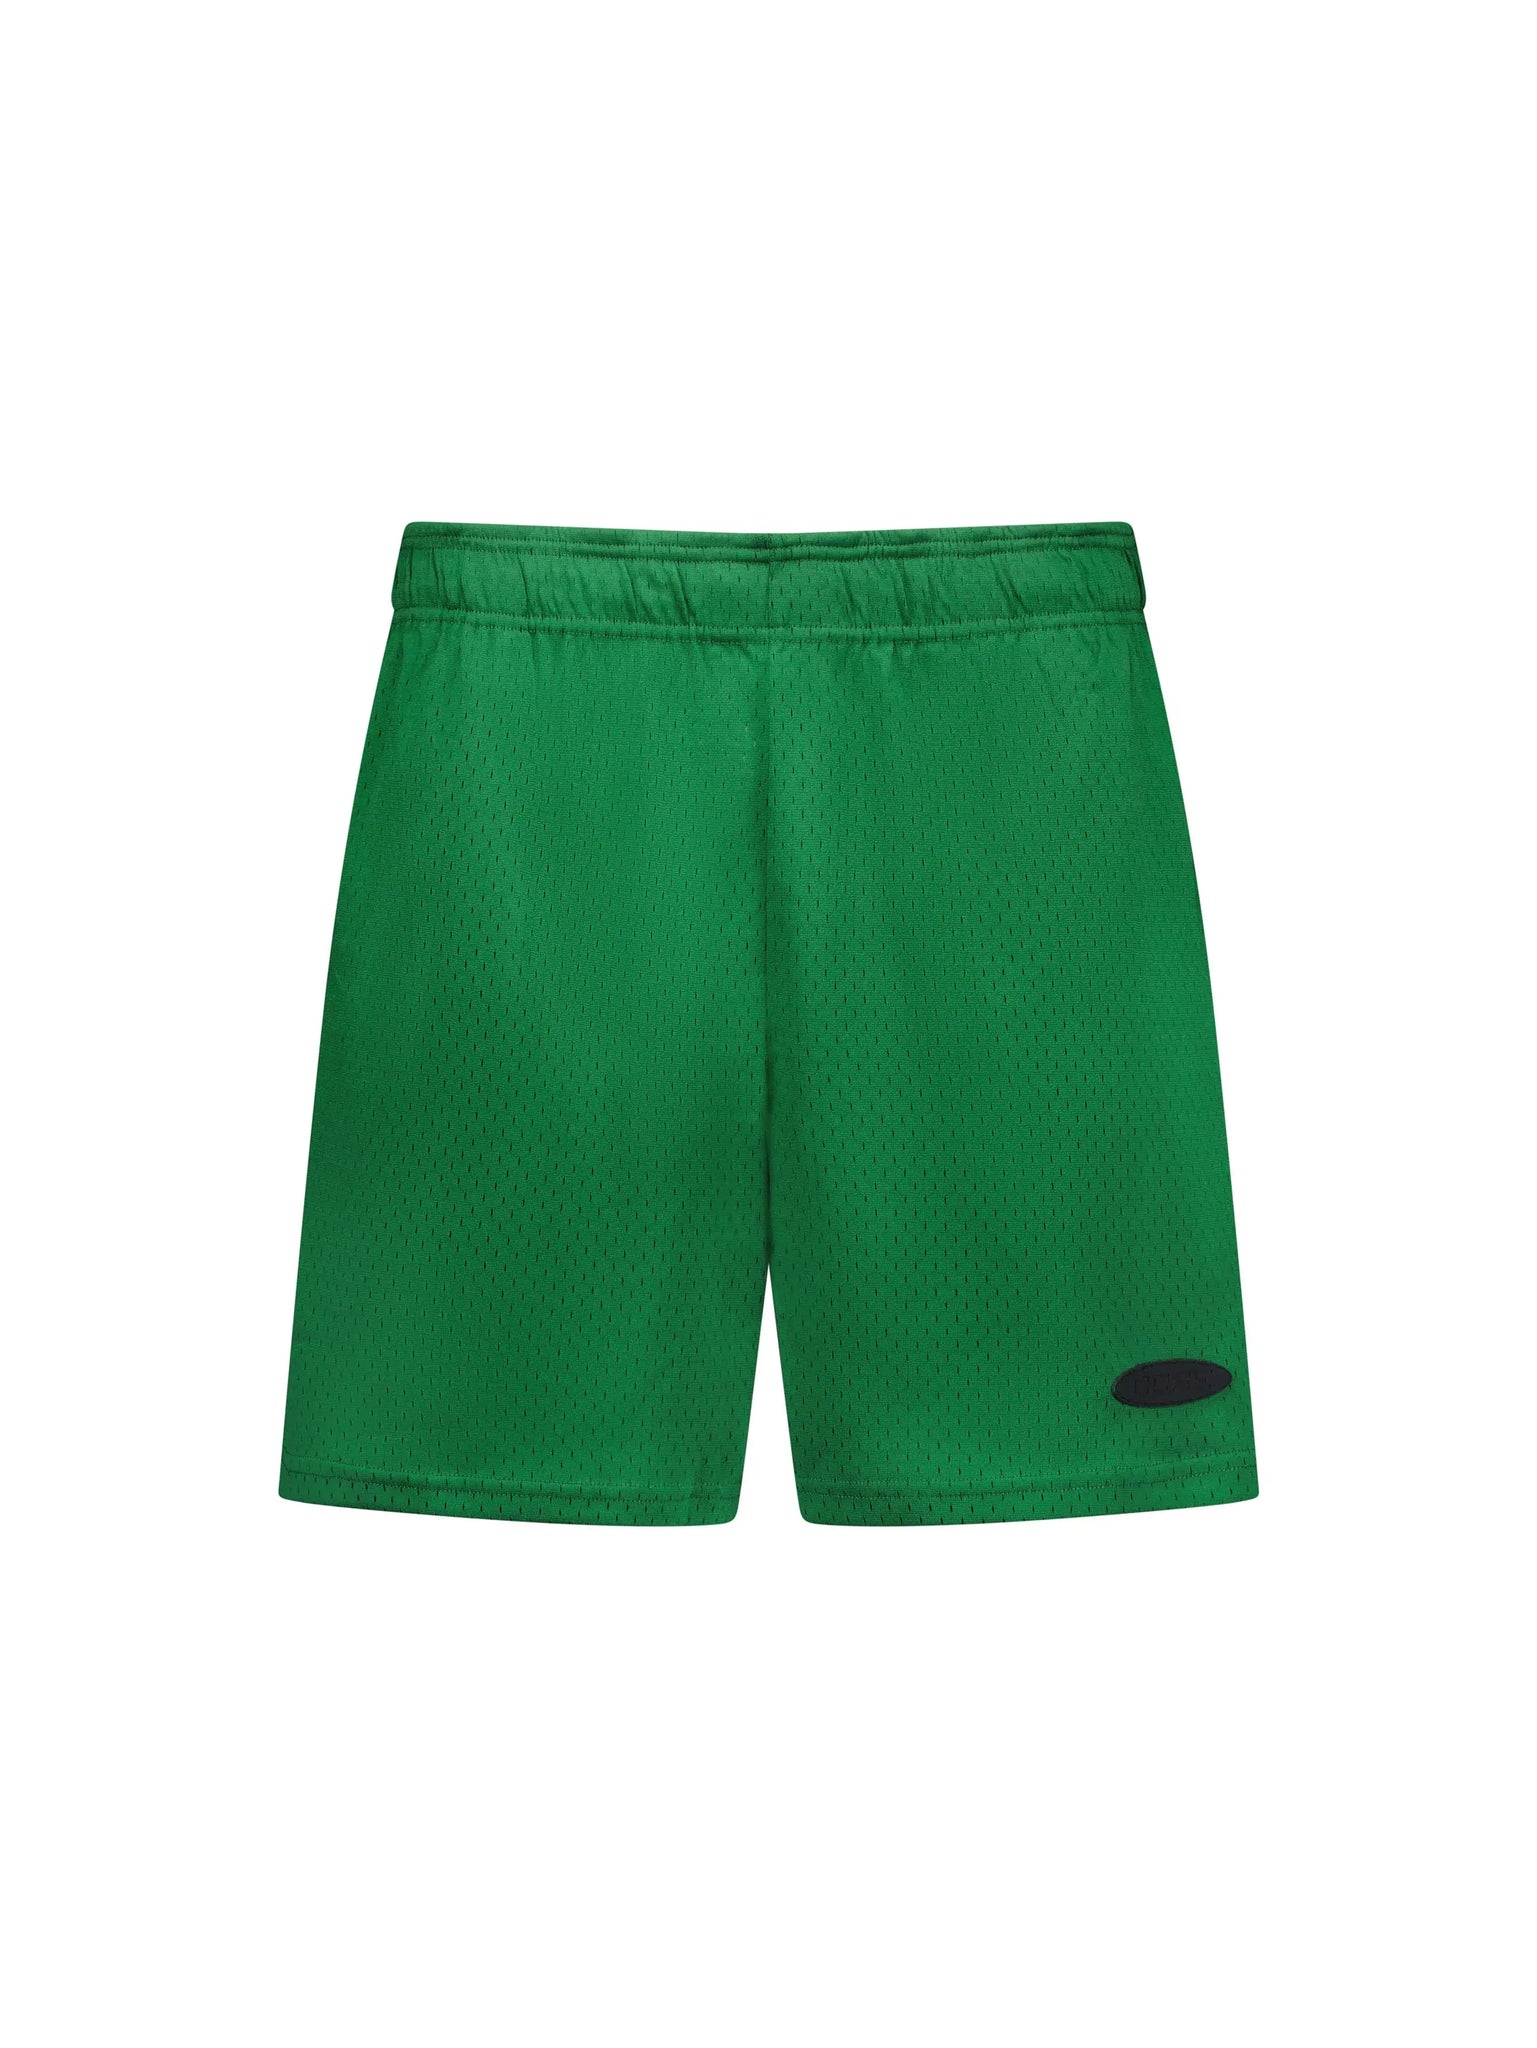 CORE Essential Mesh Shorts Green in Auckland, New Zealand - Shop name